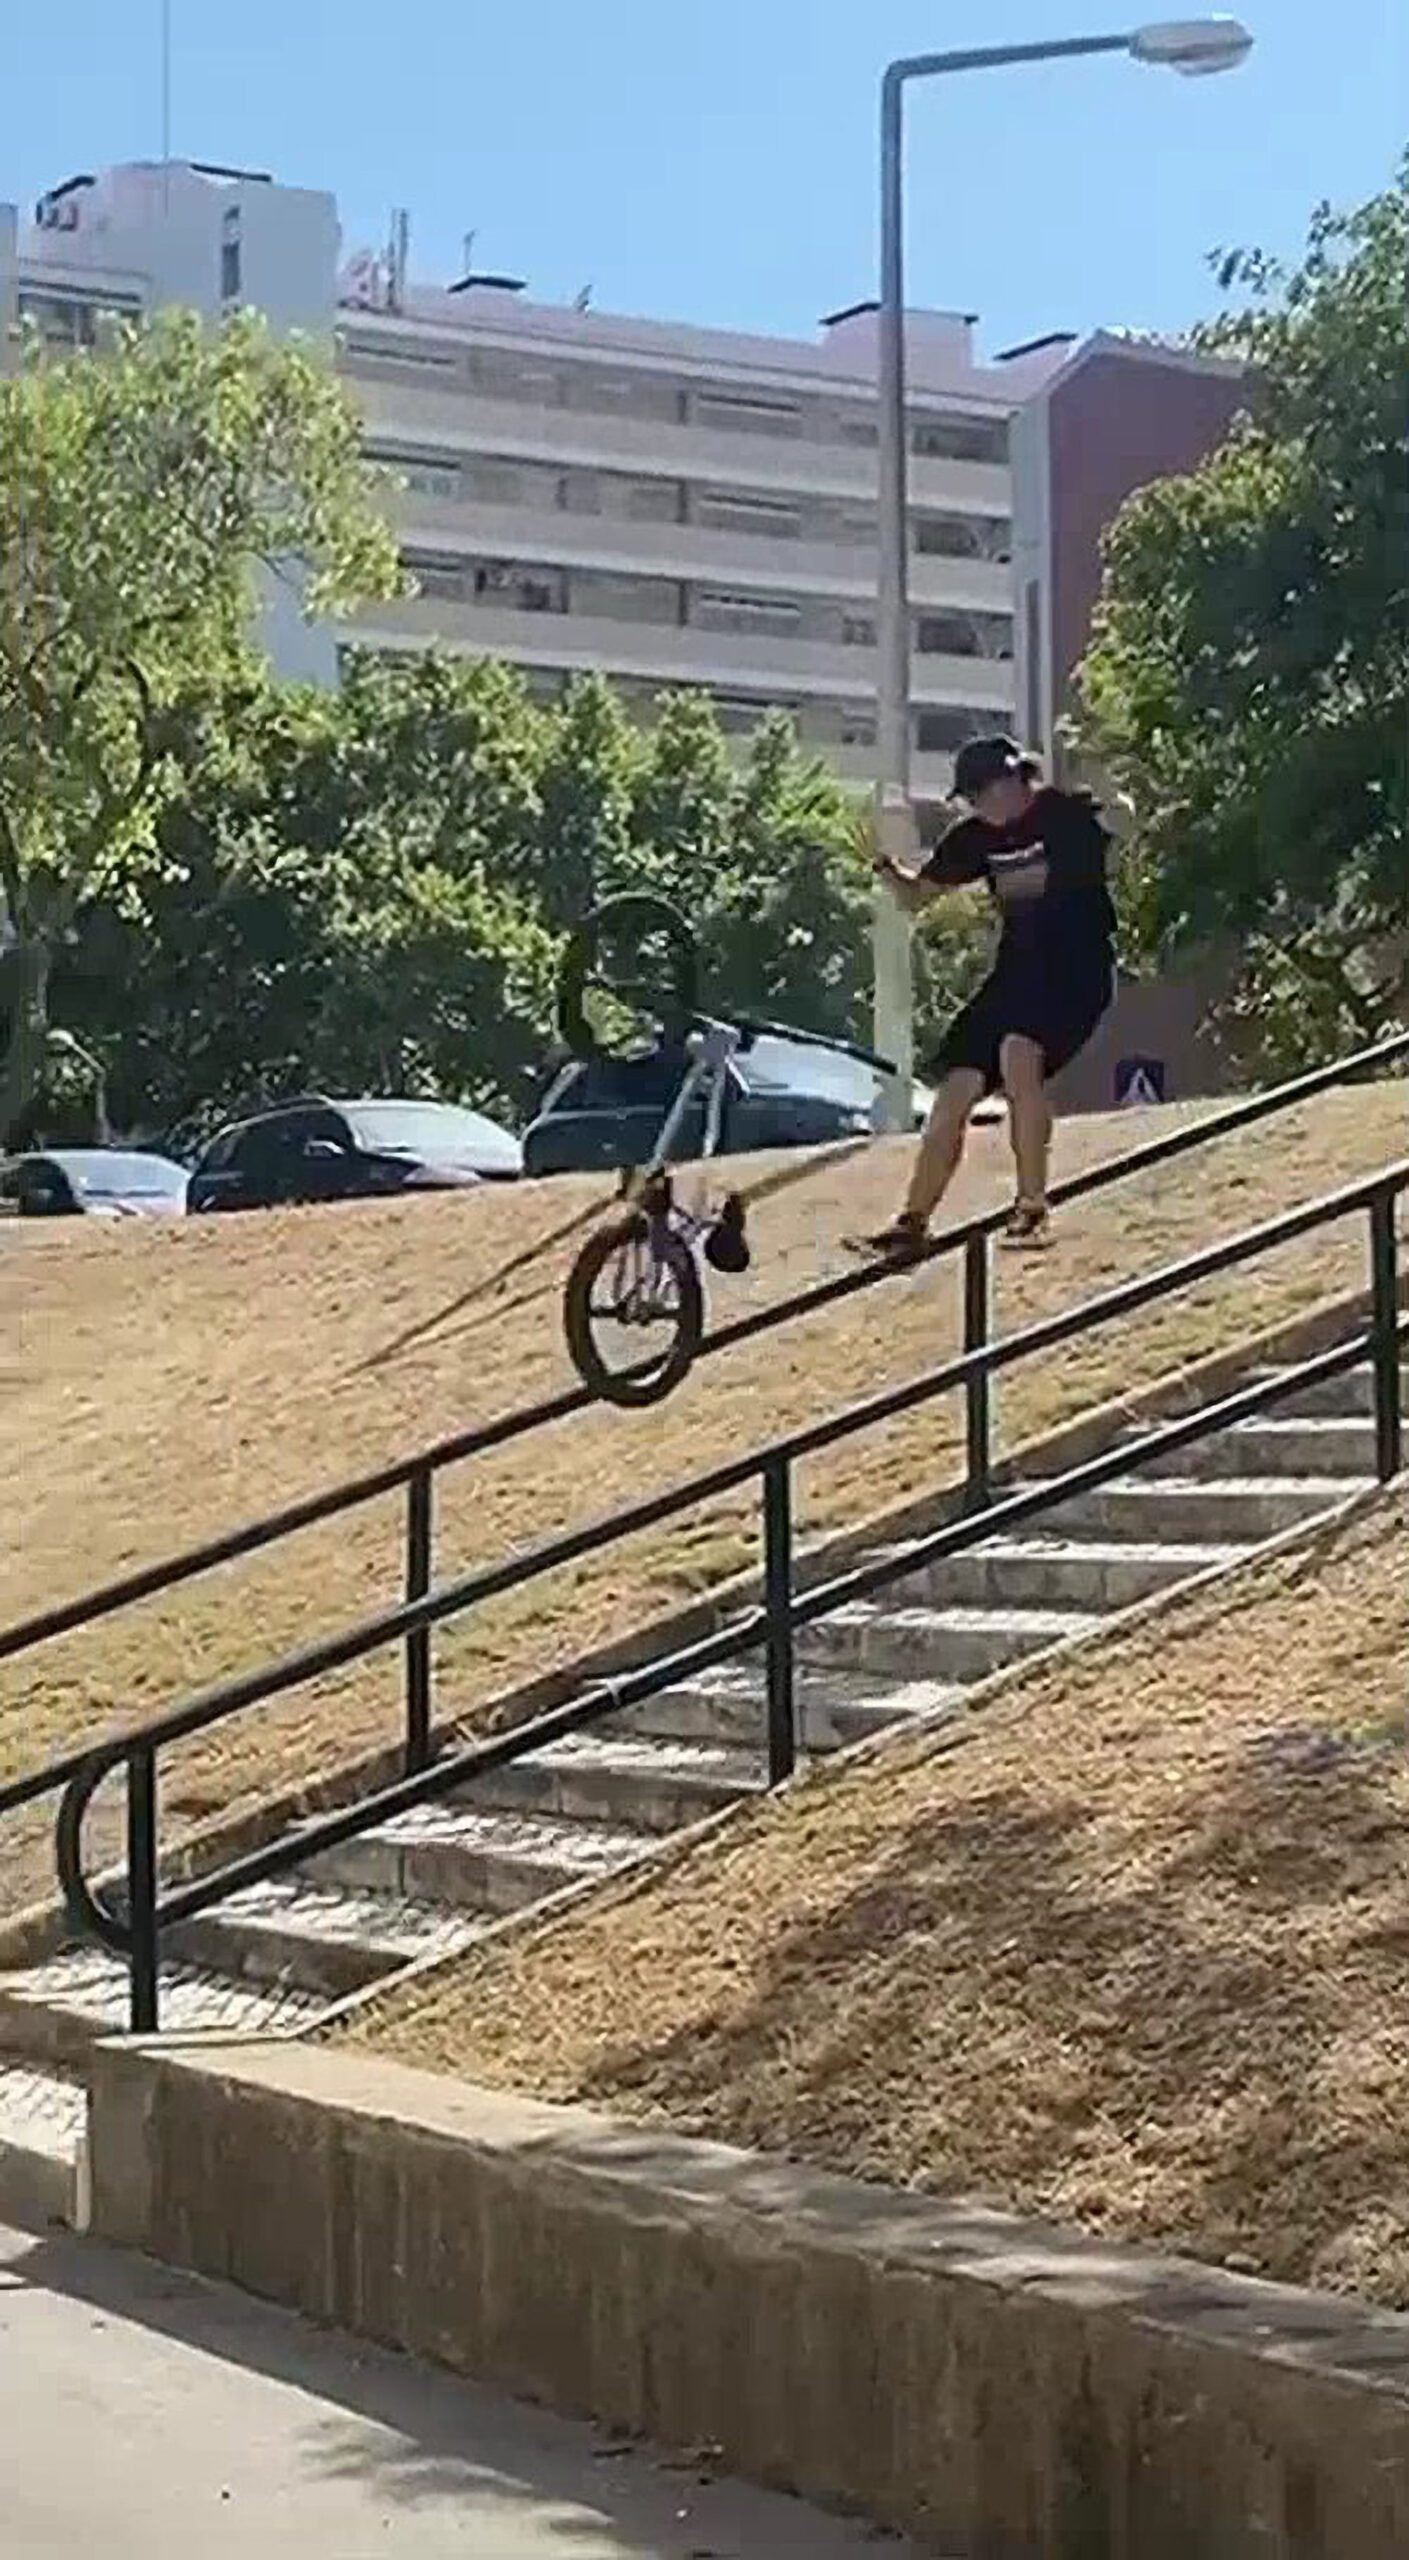 Duarte Abrantes, 17, fails BMX stunt and experiences by far his worst injury, in Lisbon, Portugal on Saturday, July 9, 2022. In spite of the accident, Duarte stated he still had a great time at the BMX jam.  (@kiko_bmx_/Zenger)